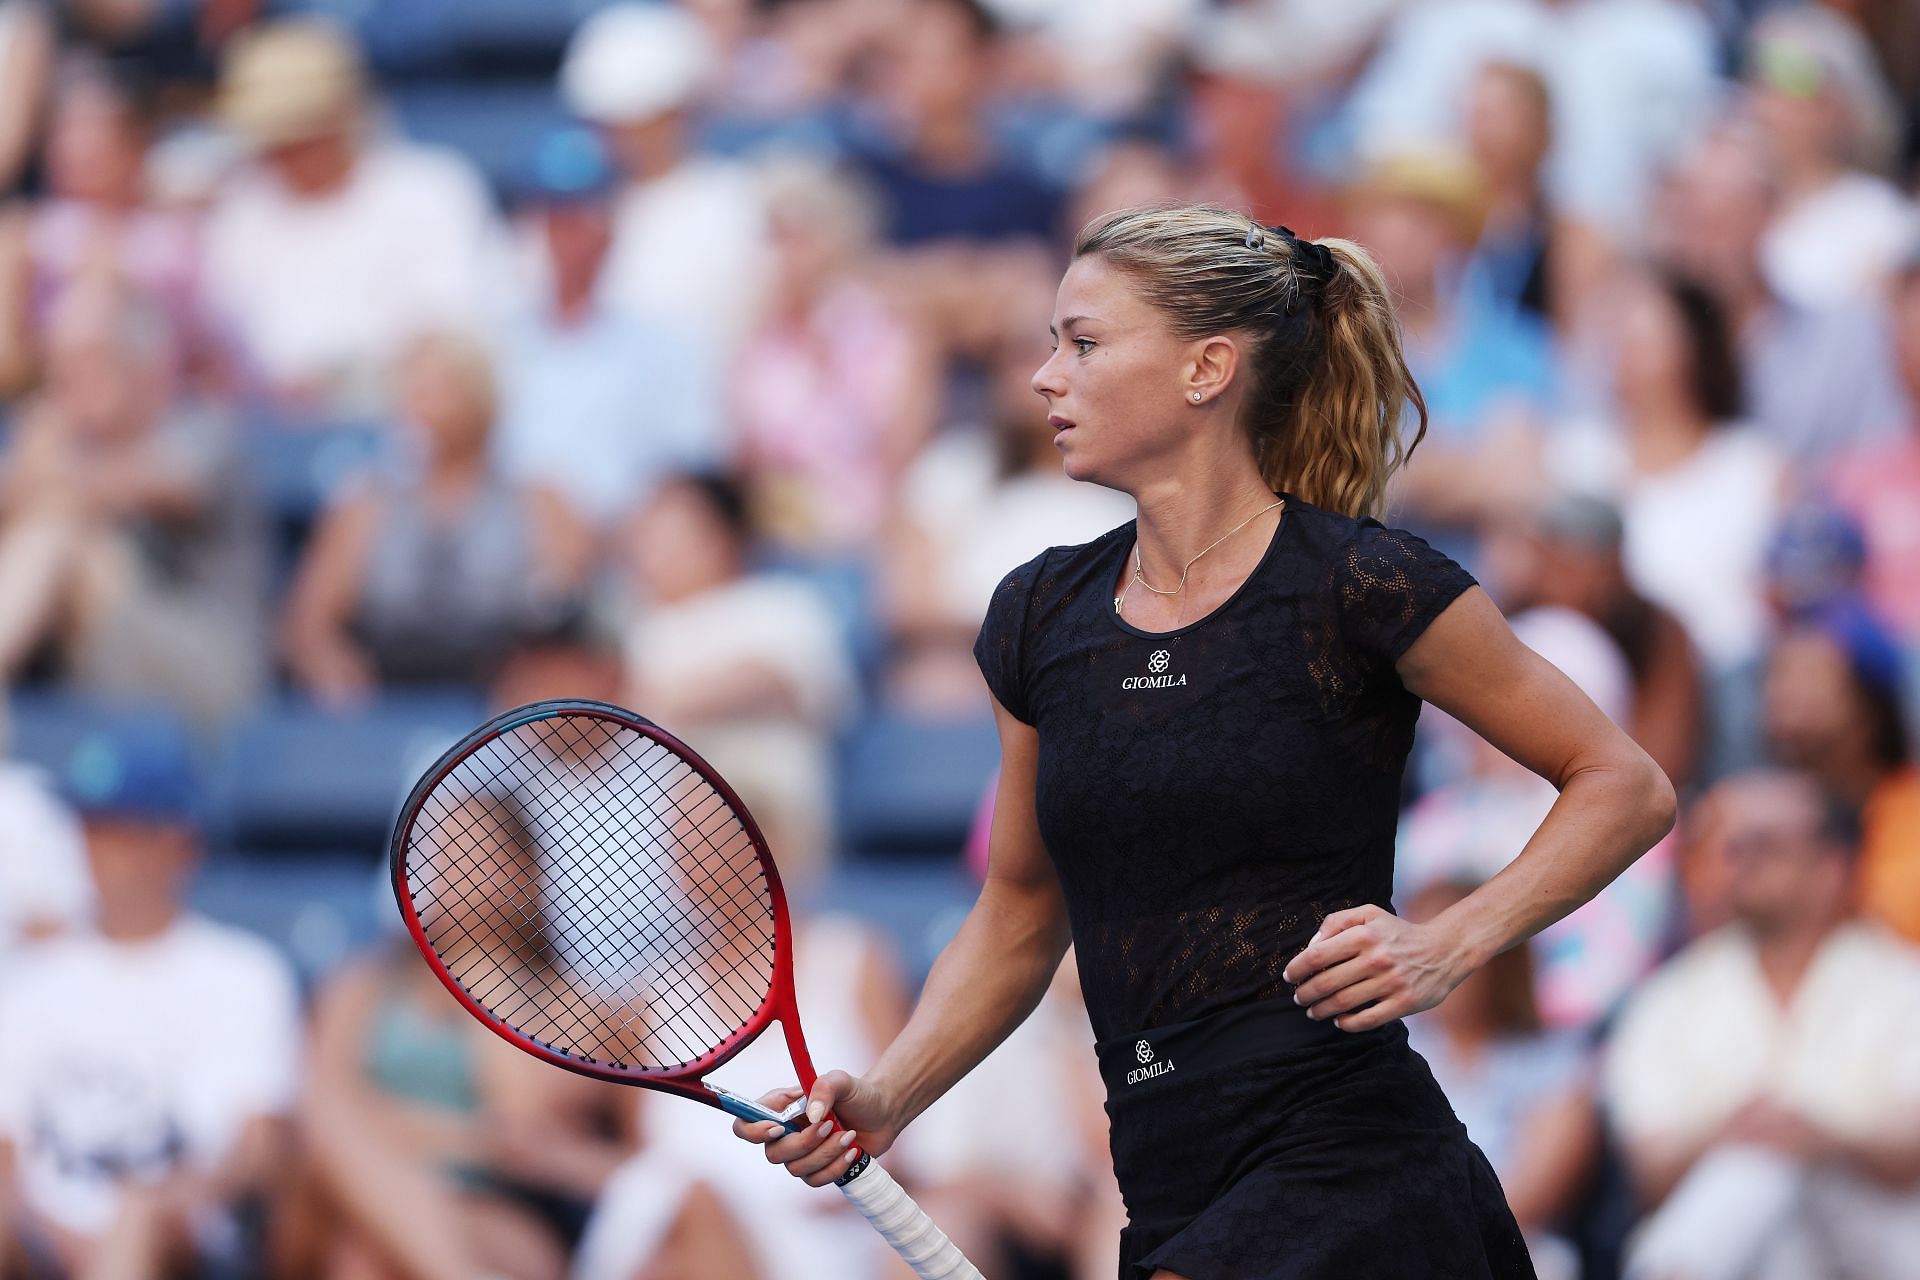 Camila Giorgi in action at the 2022 US Open.